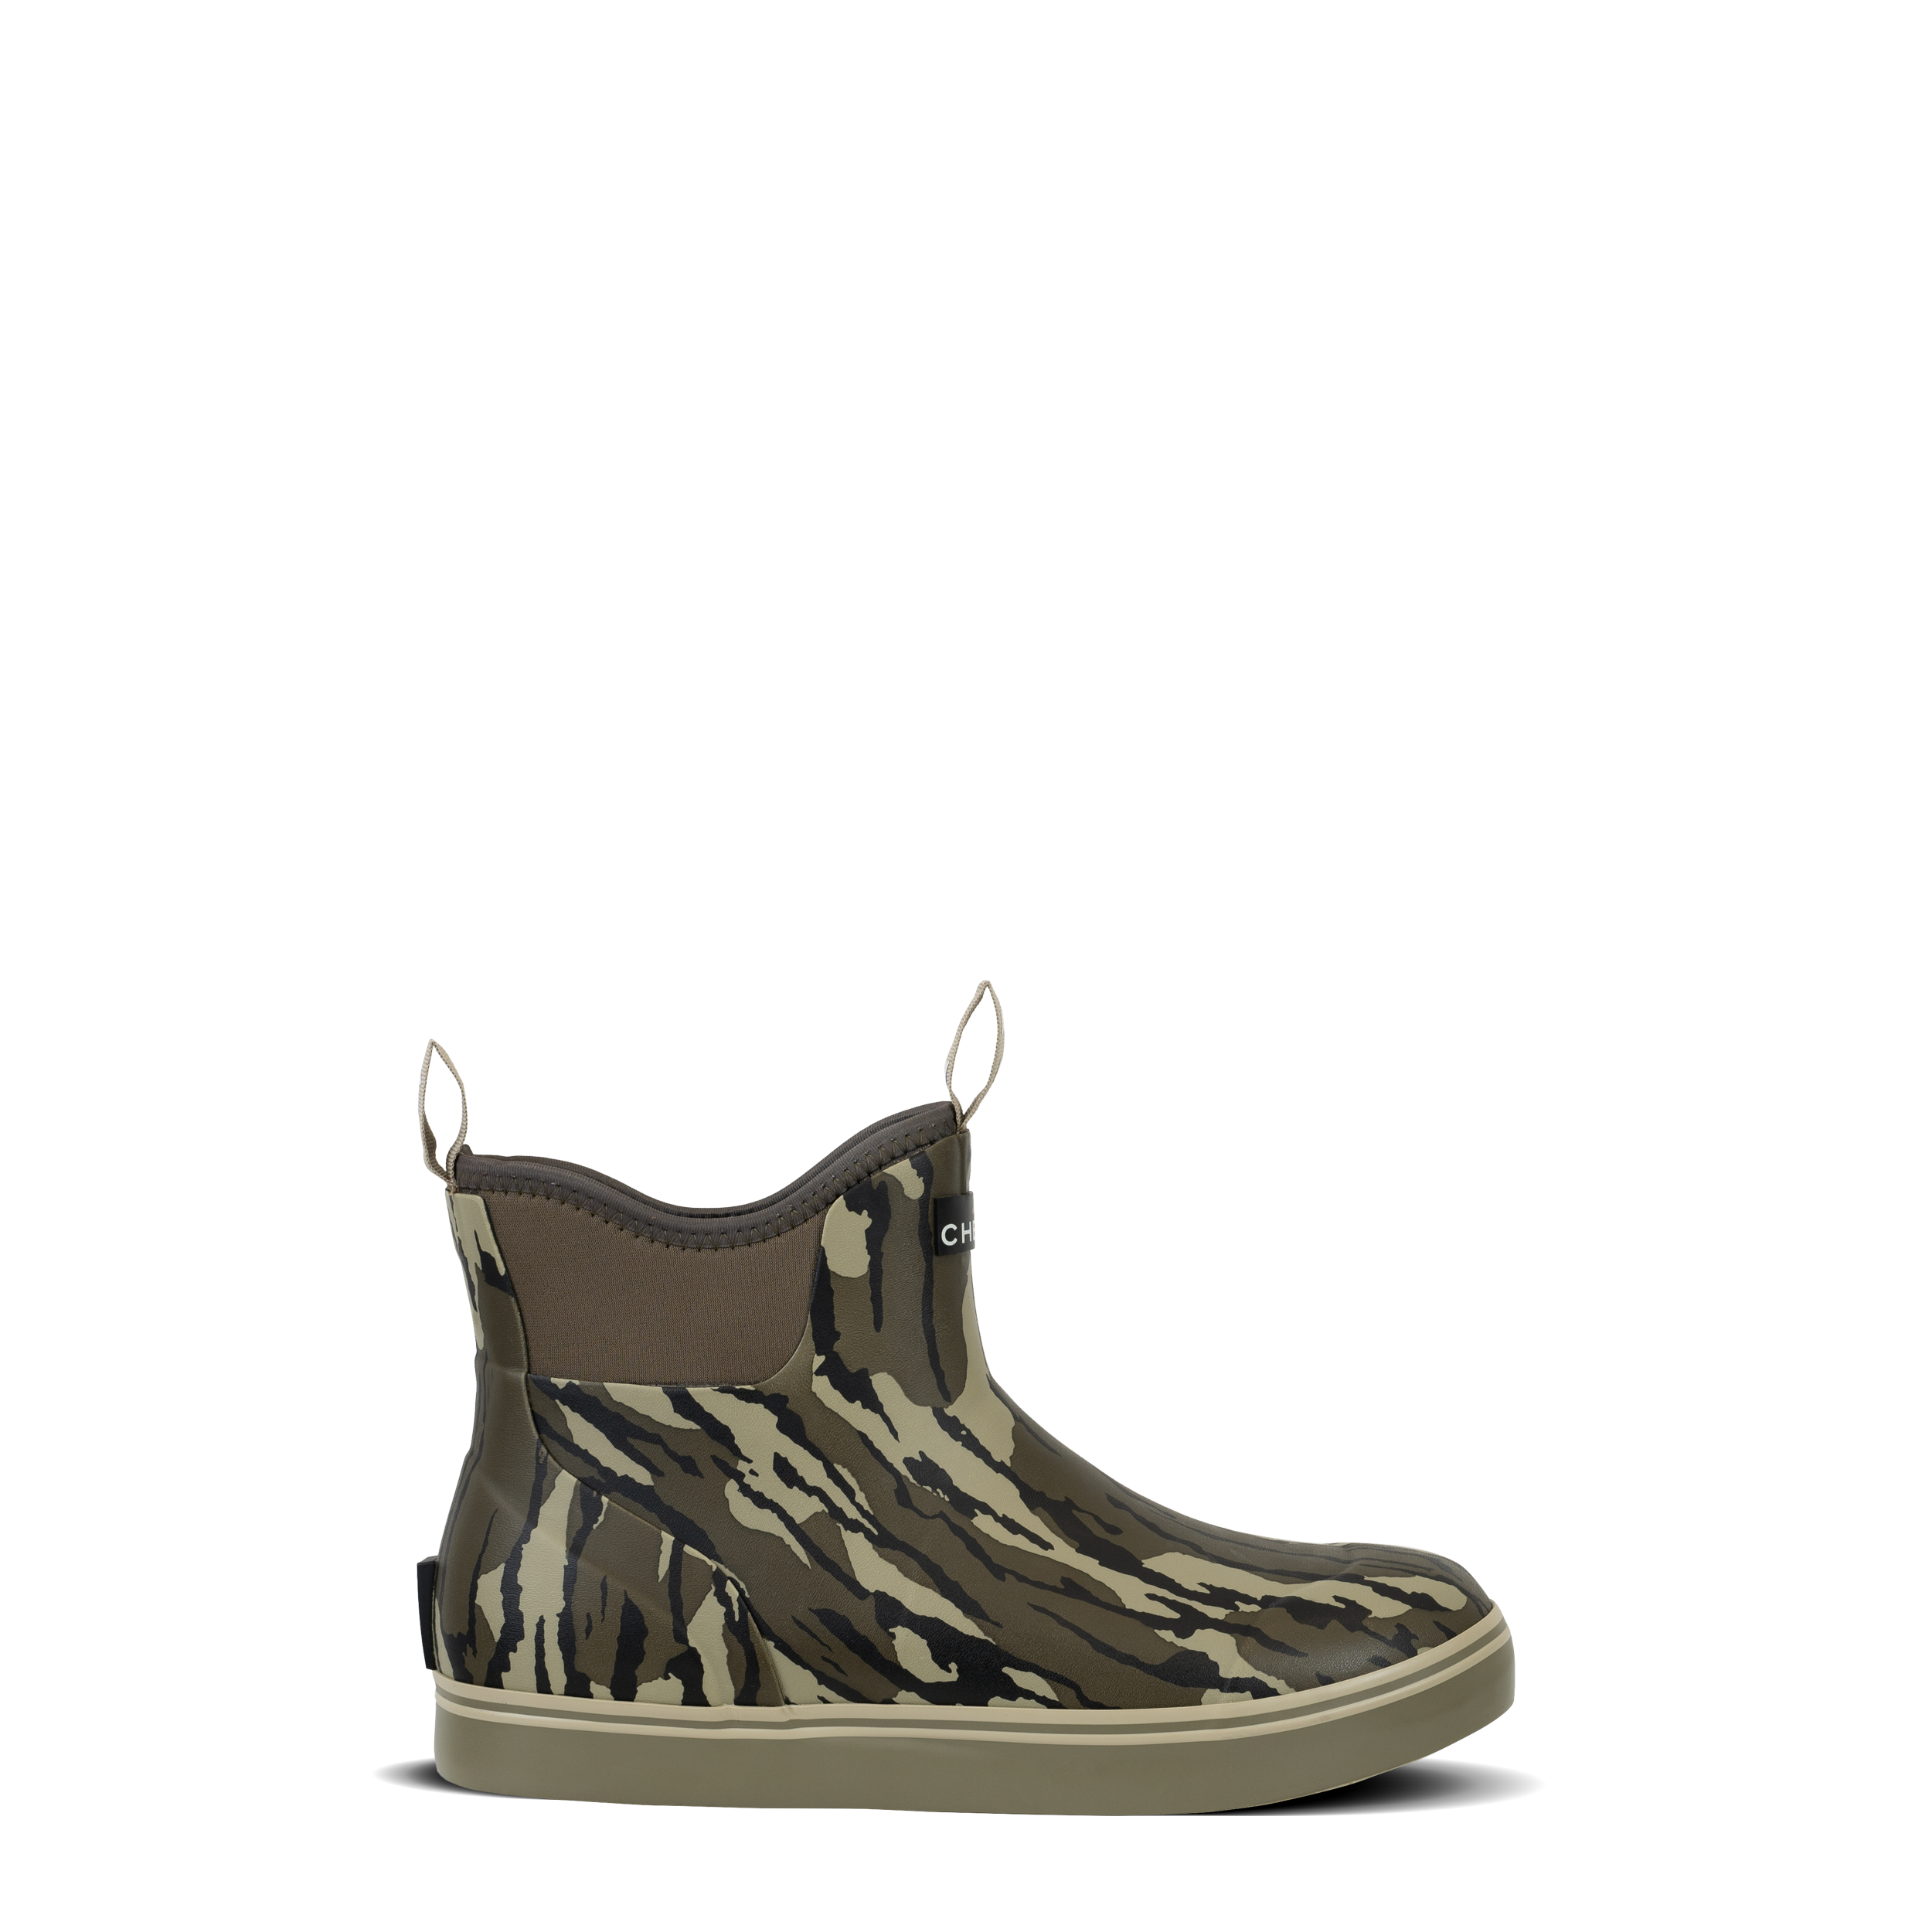 Scout Boot